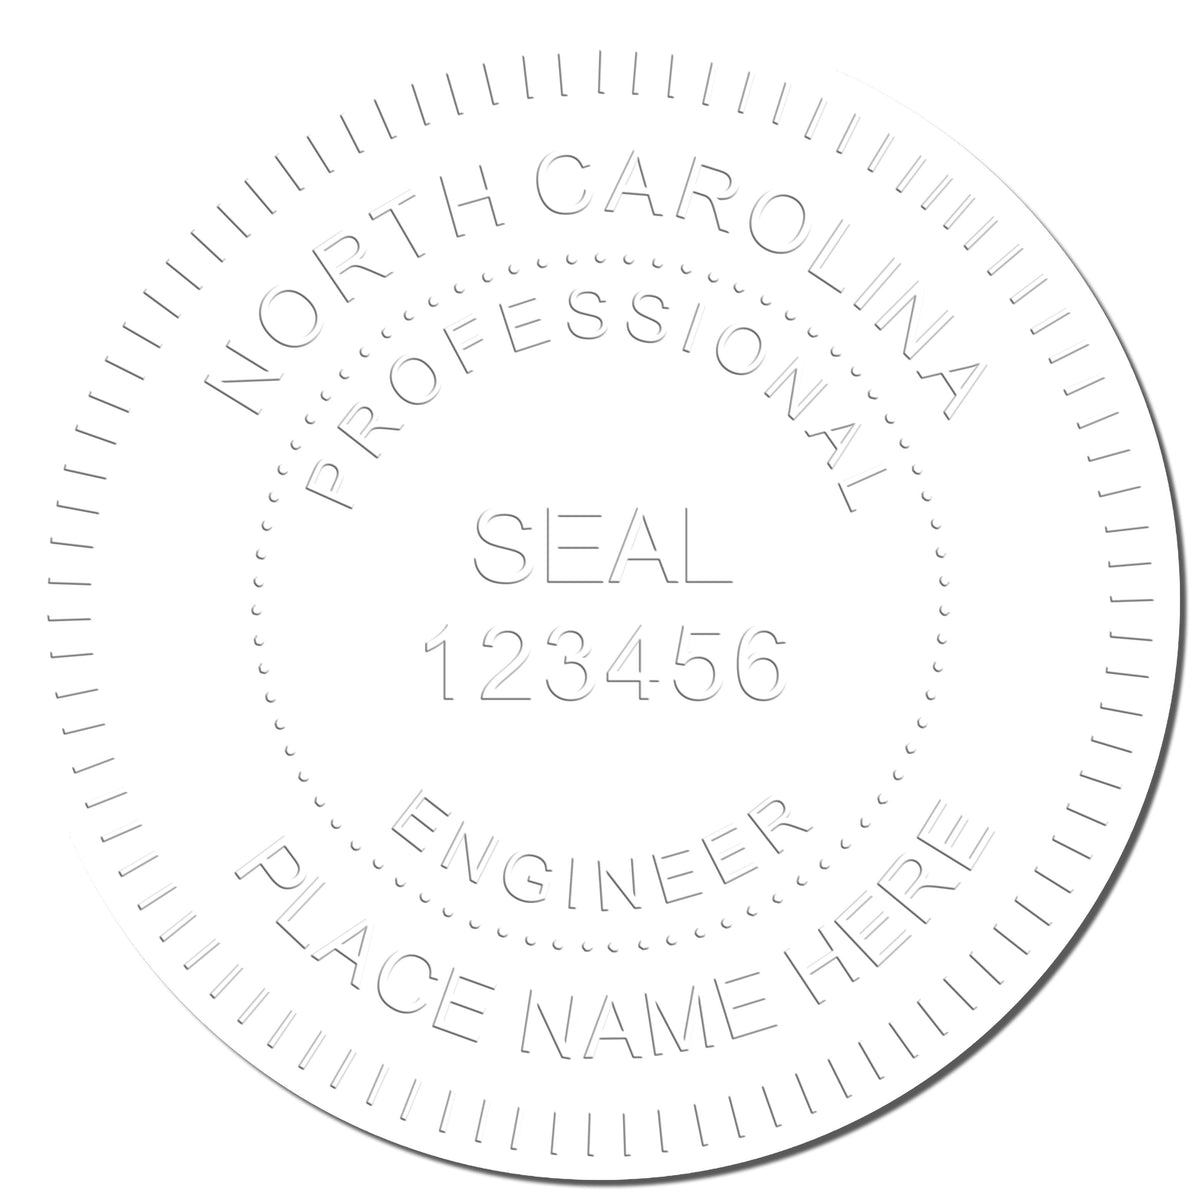 This paper is stamped with a sample imprint of the Gift North Carolina Engineer Seal, signifying its quality and reliability.